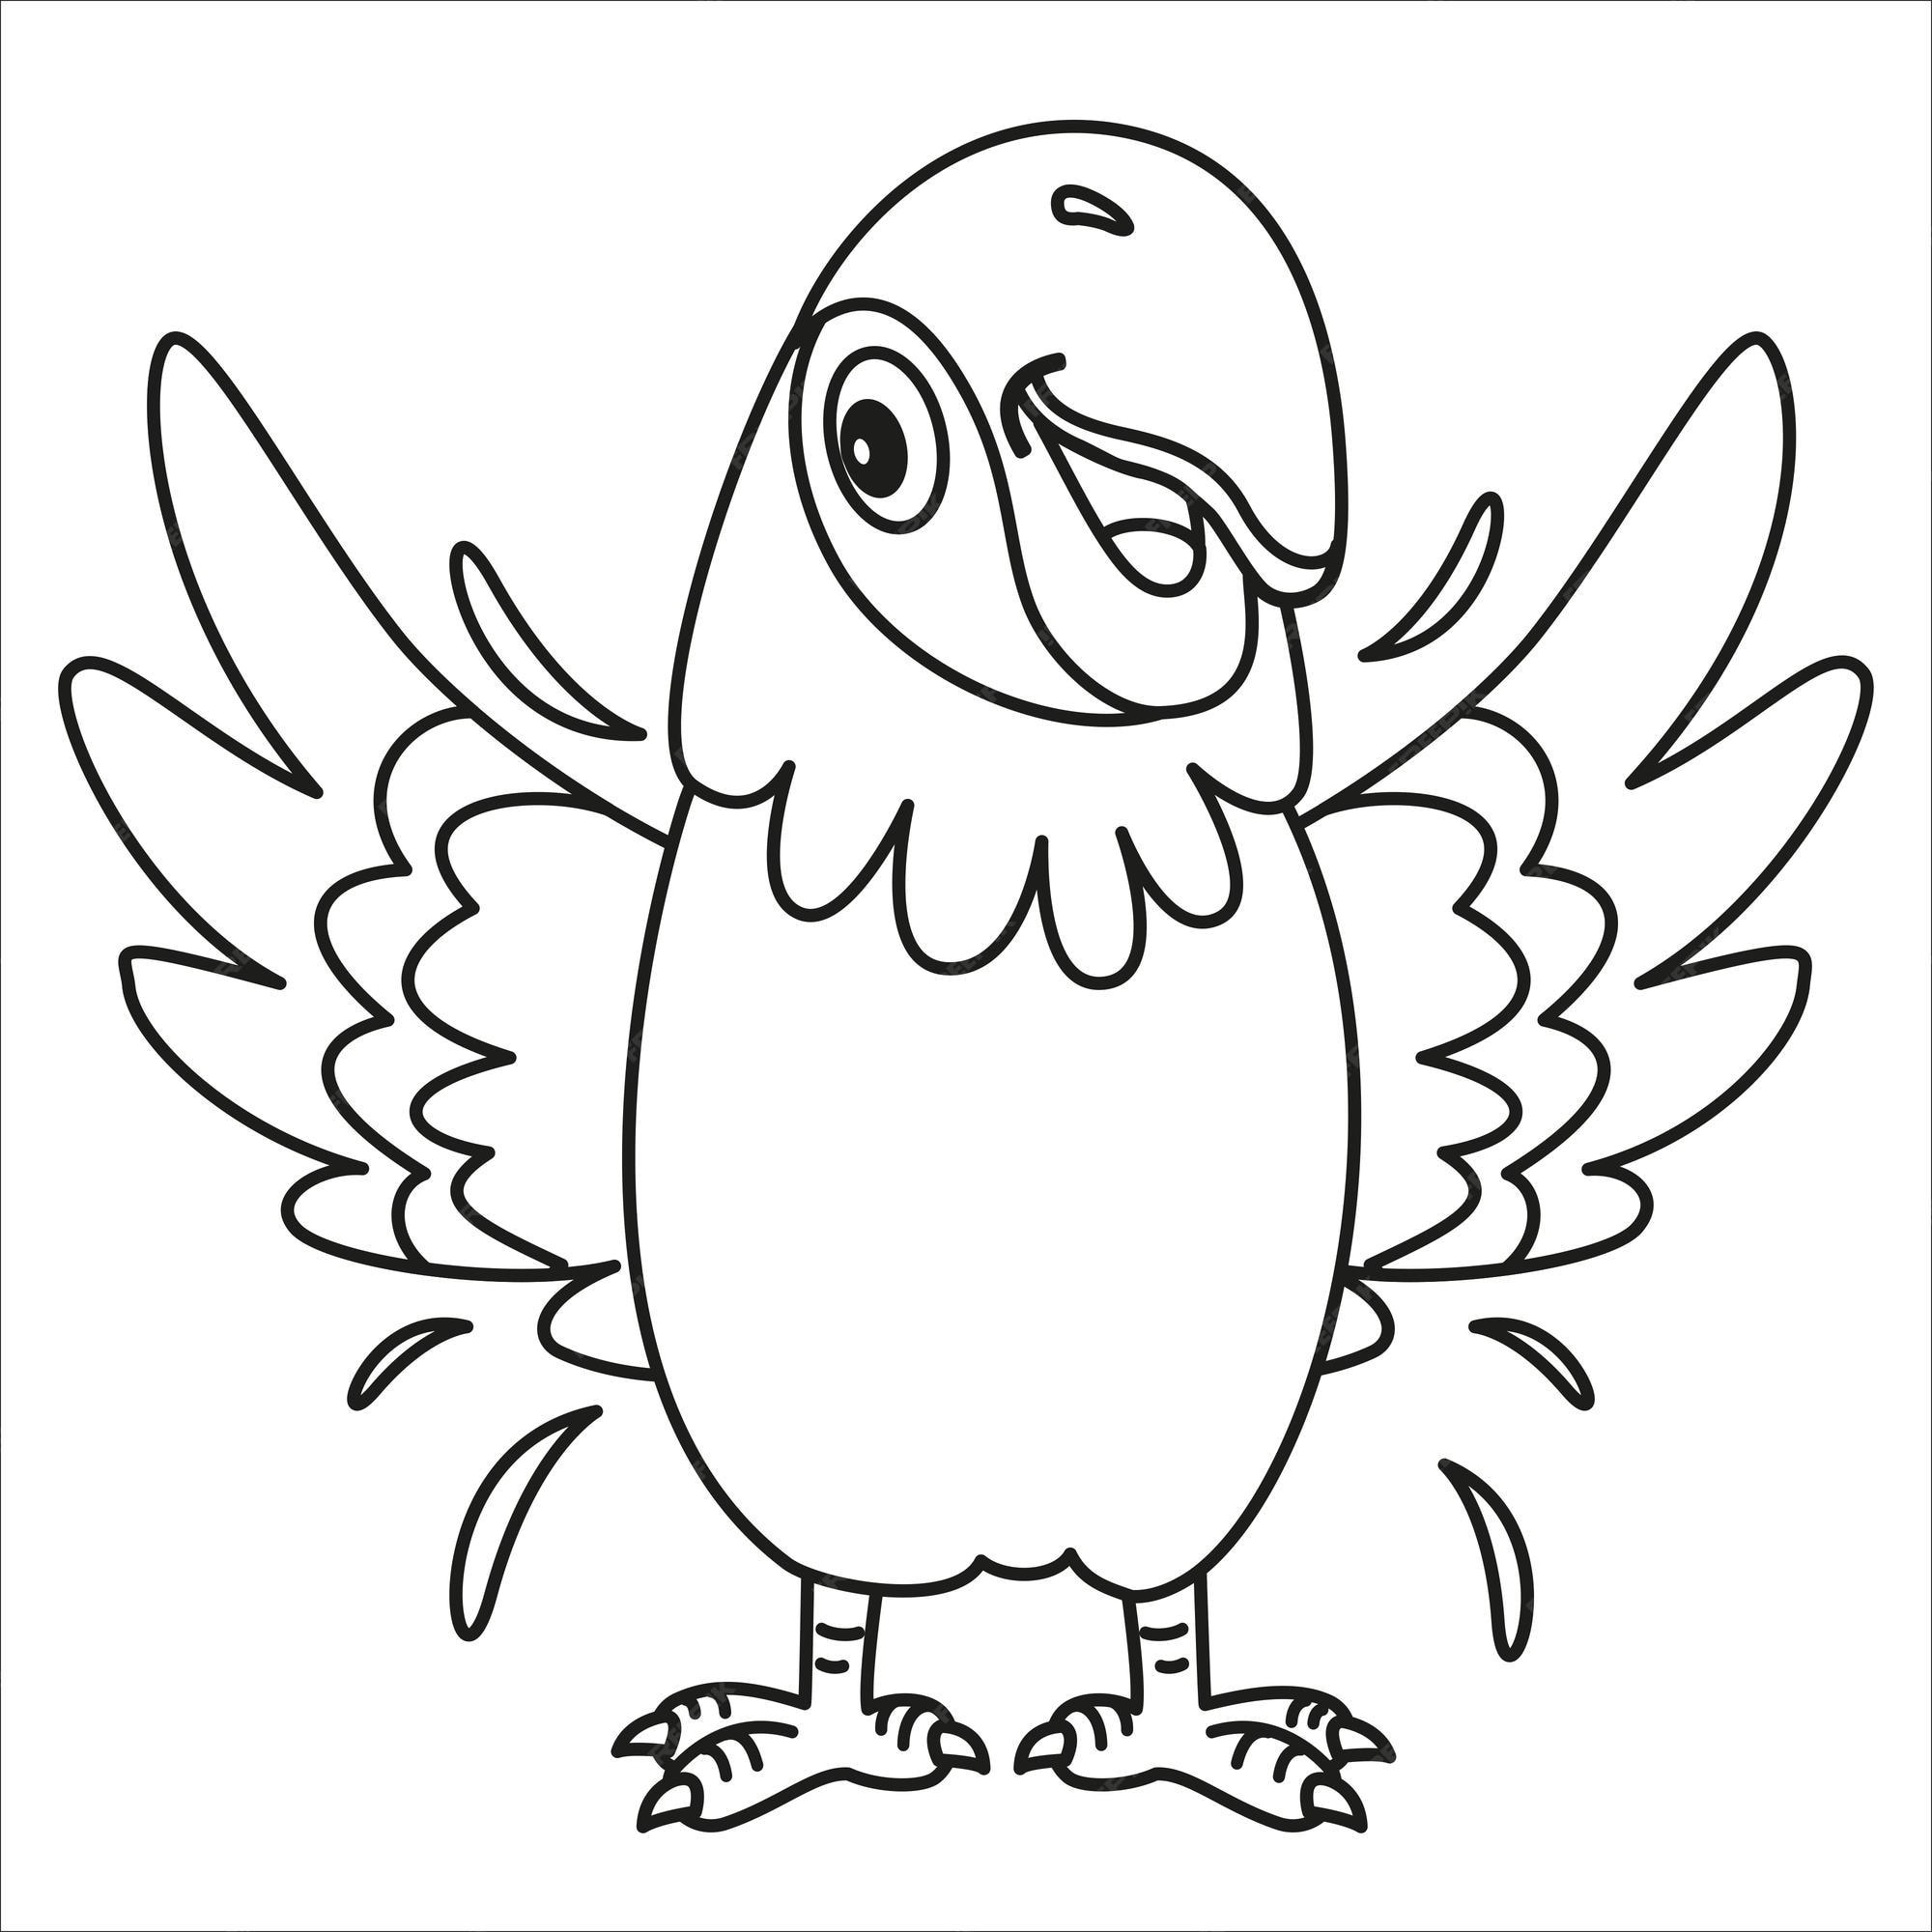 Premium Vector  Line art drawing for kids coloring page